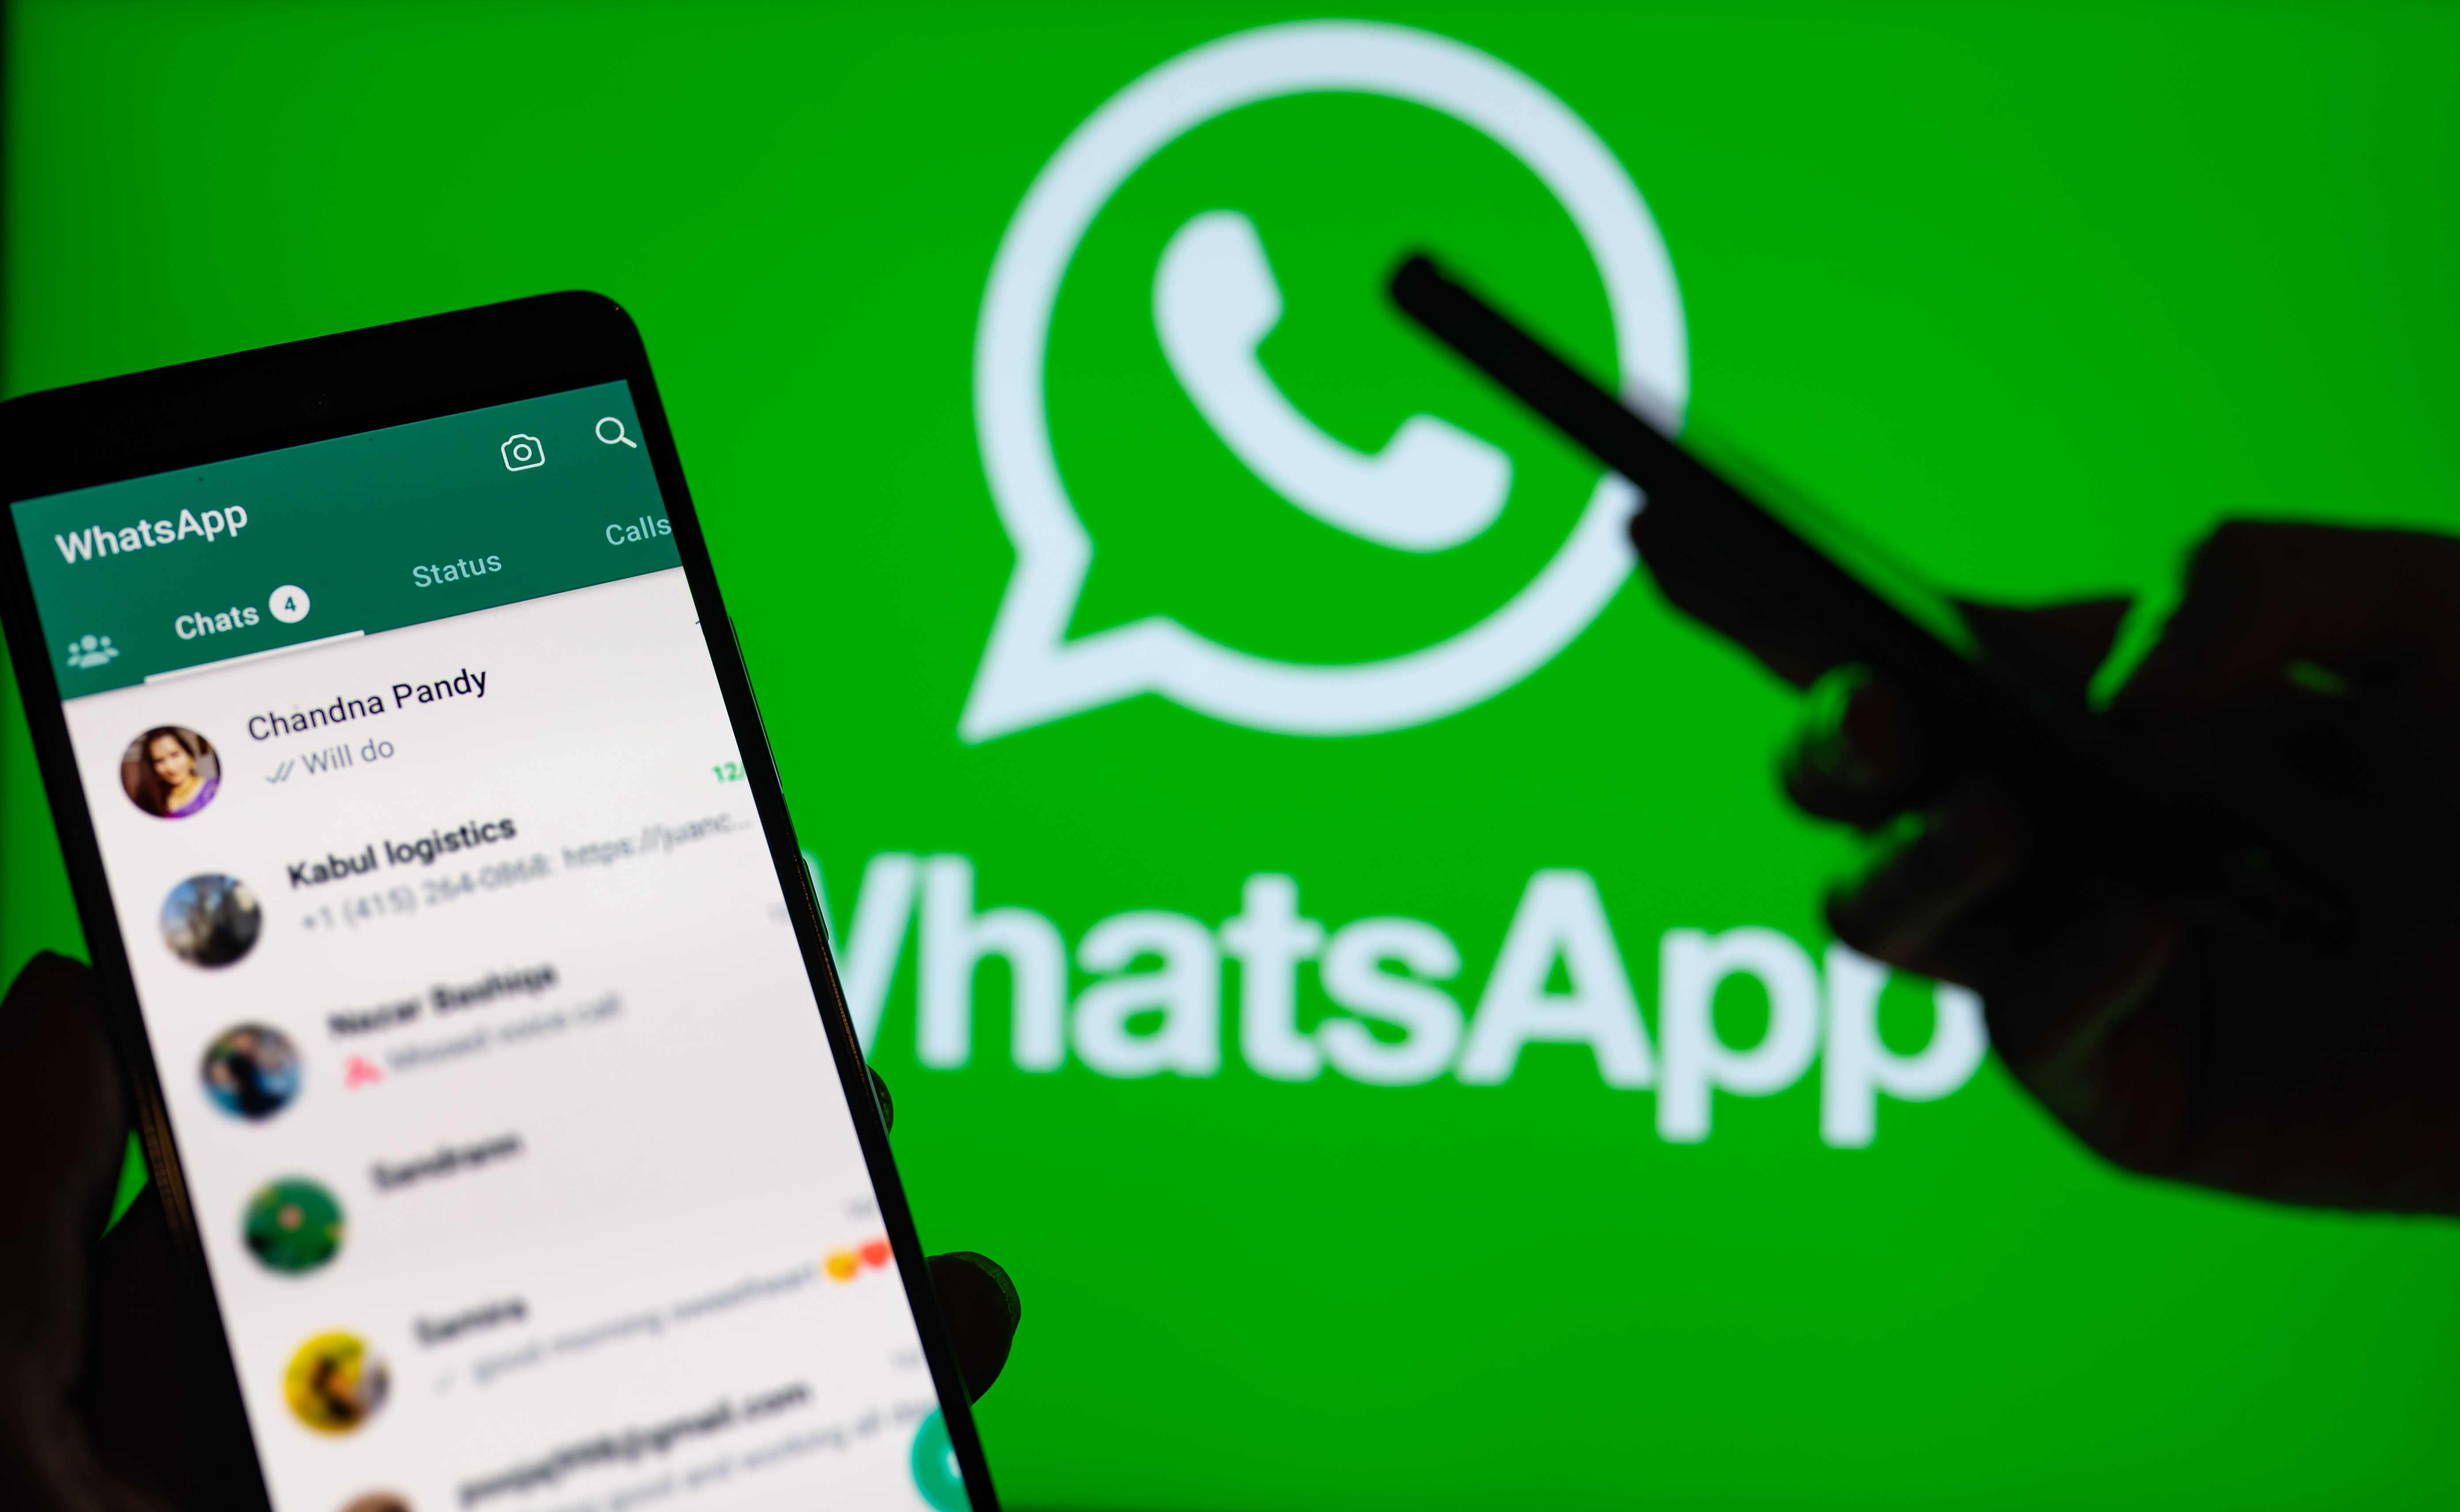 Meta's WhatsApp is chasing big businesses to capitalize on popularity